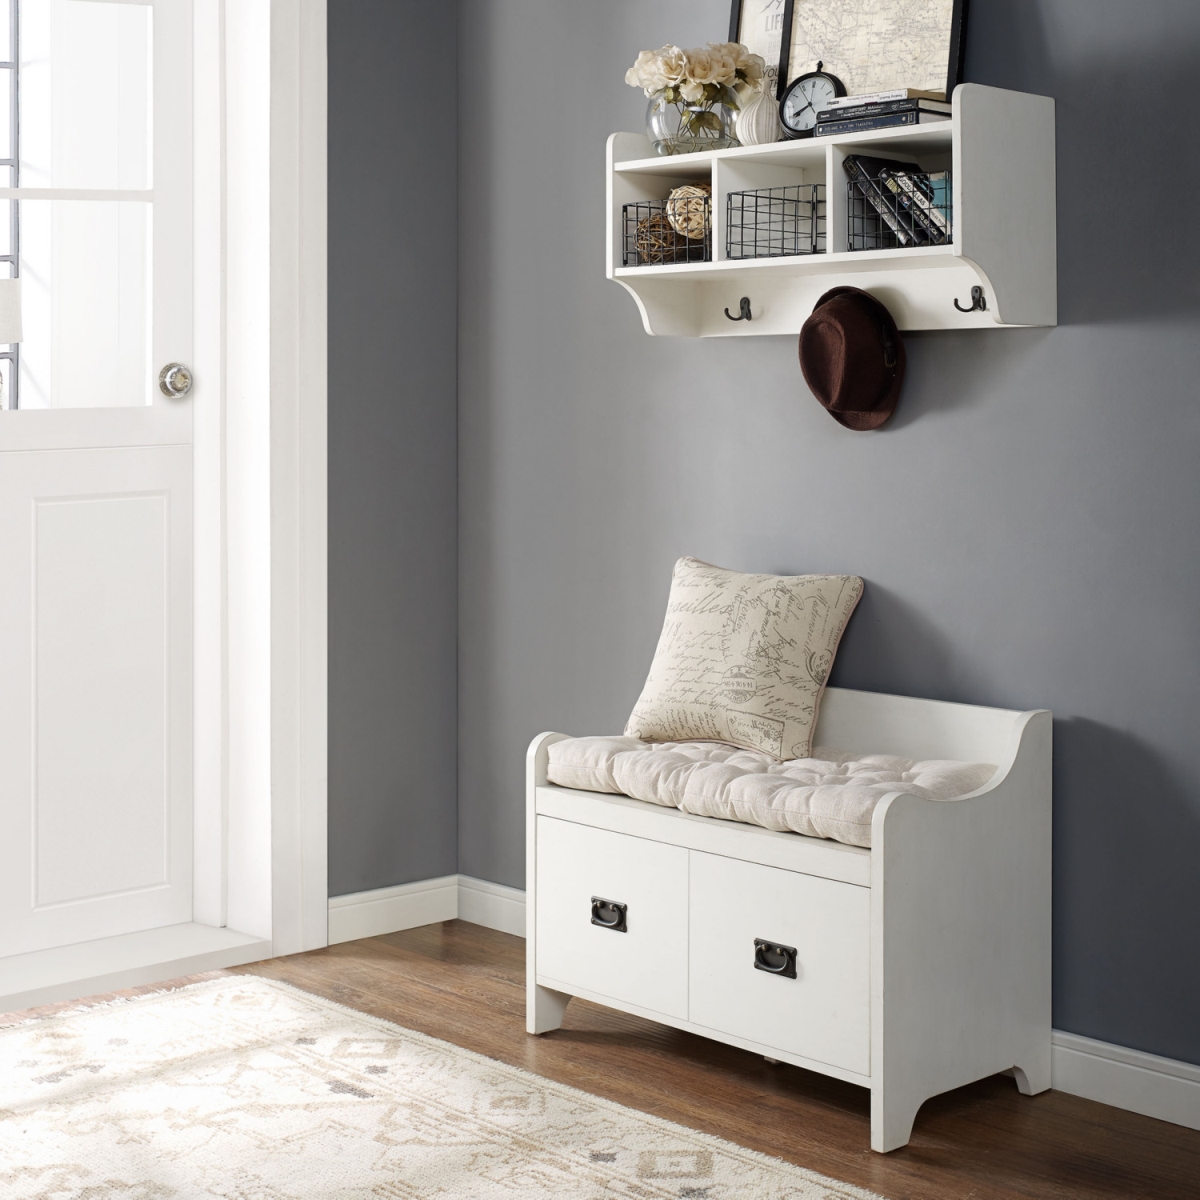 Picture of Crosley KF60003WH 2 Piece Fremont Entryway Kit - Bench, Shelf, Distressed White